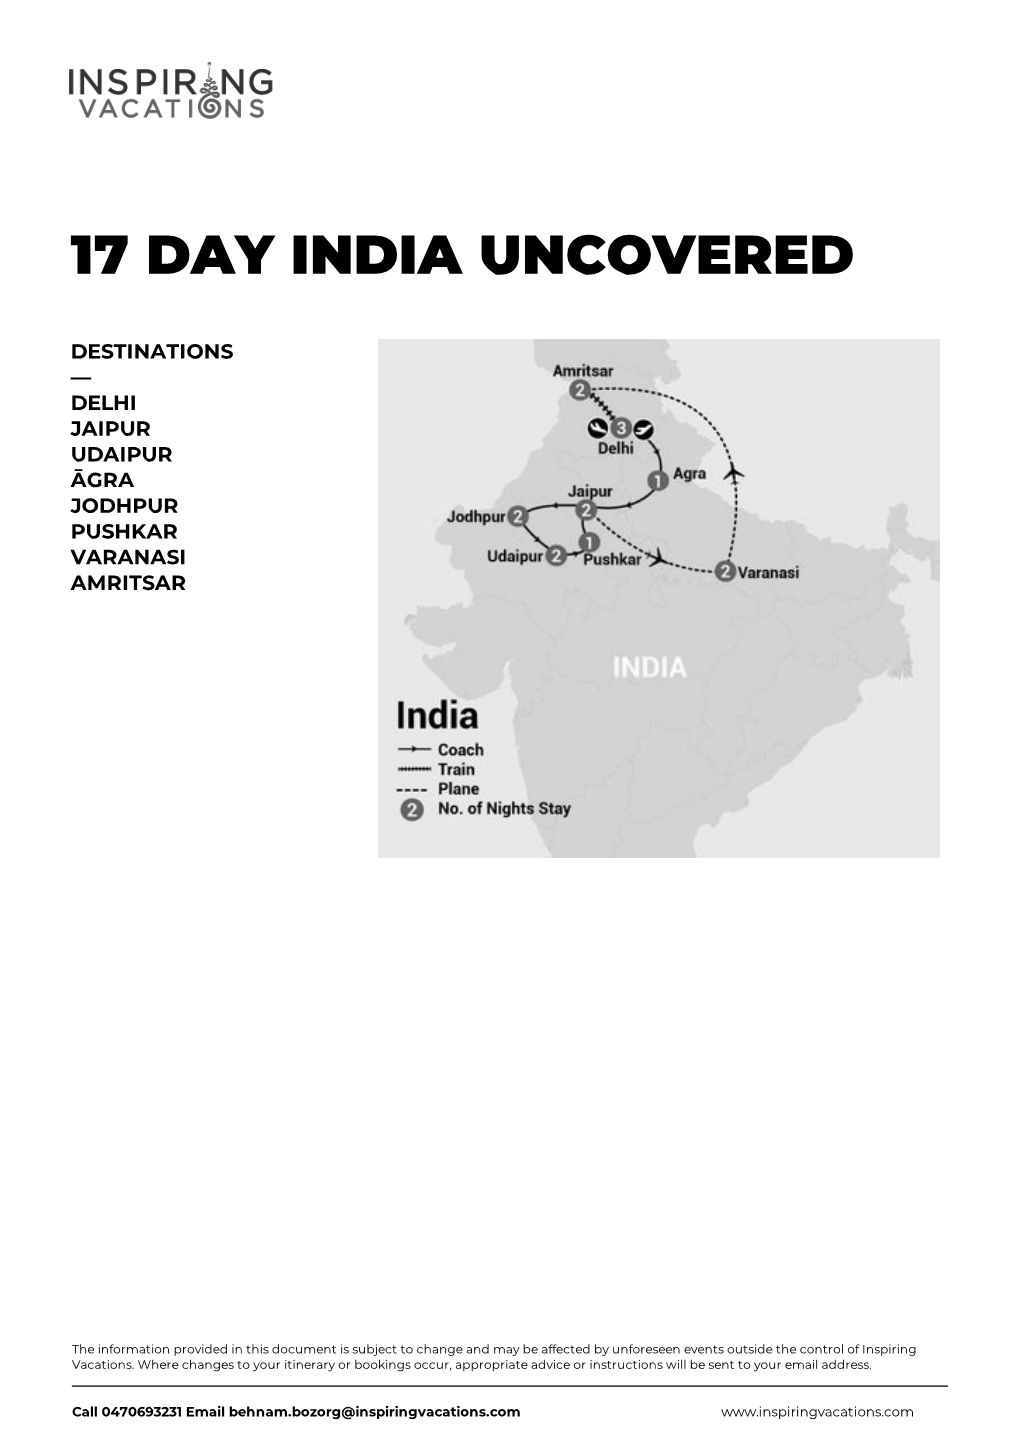 17 Day India Uncovered